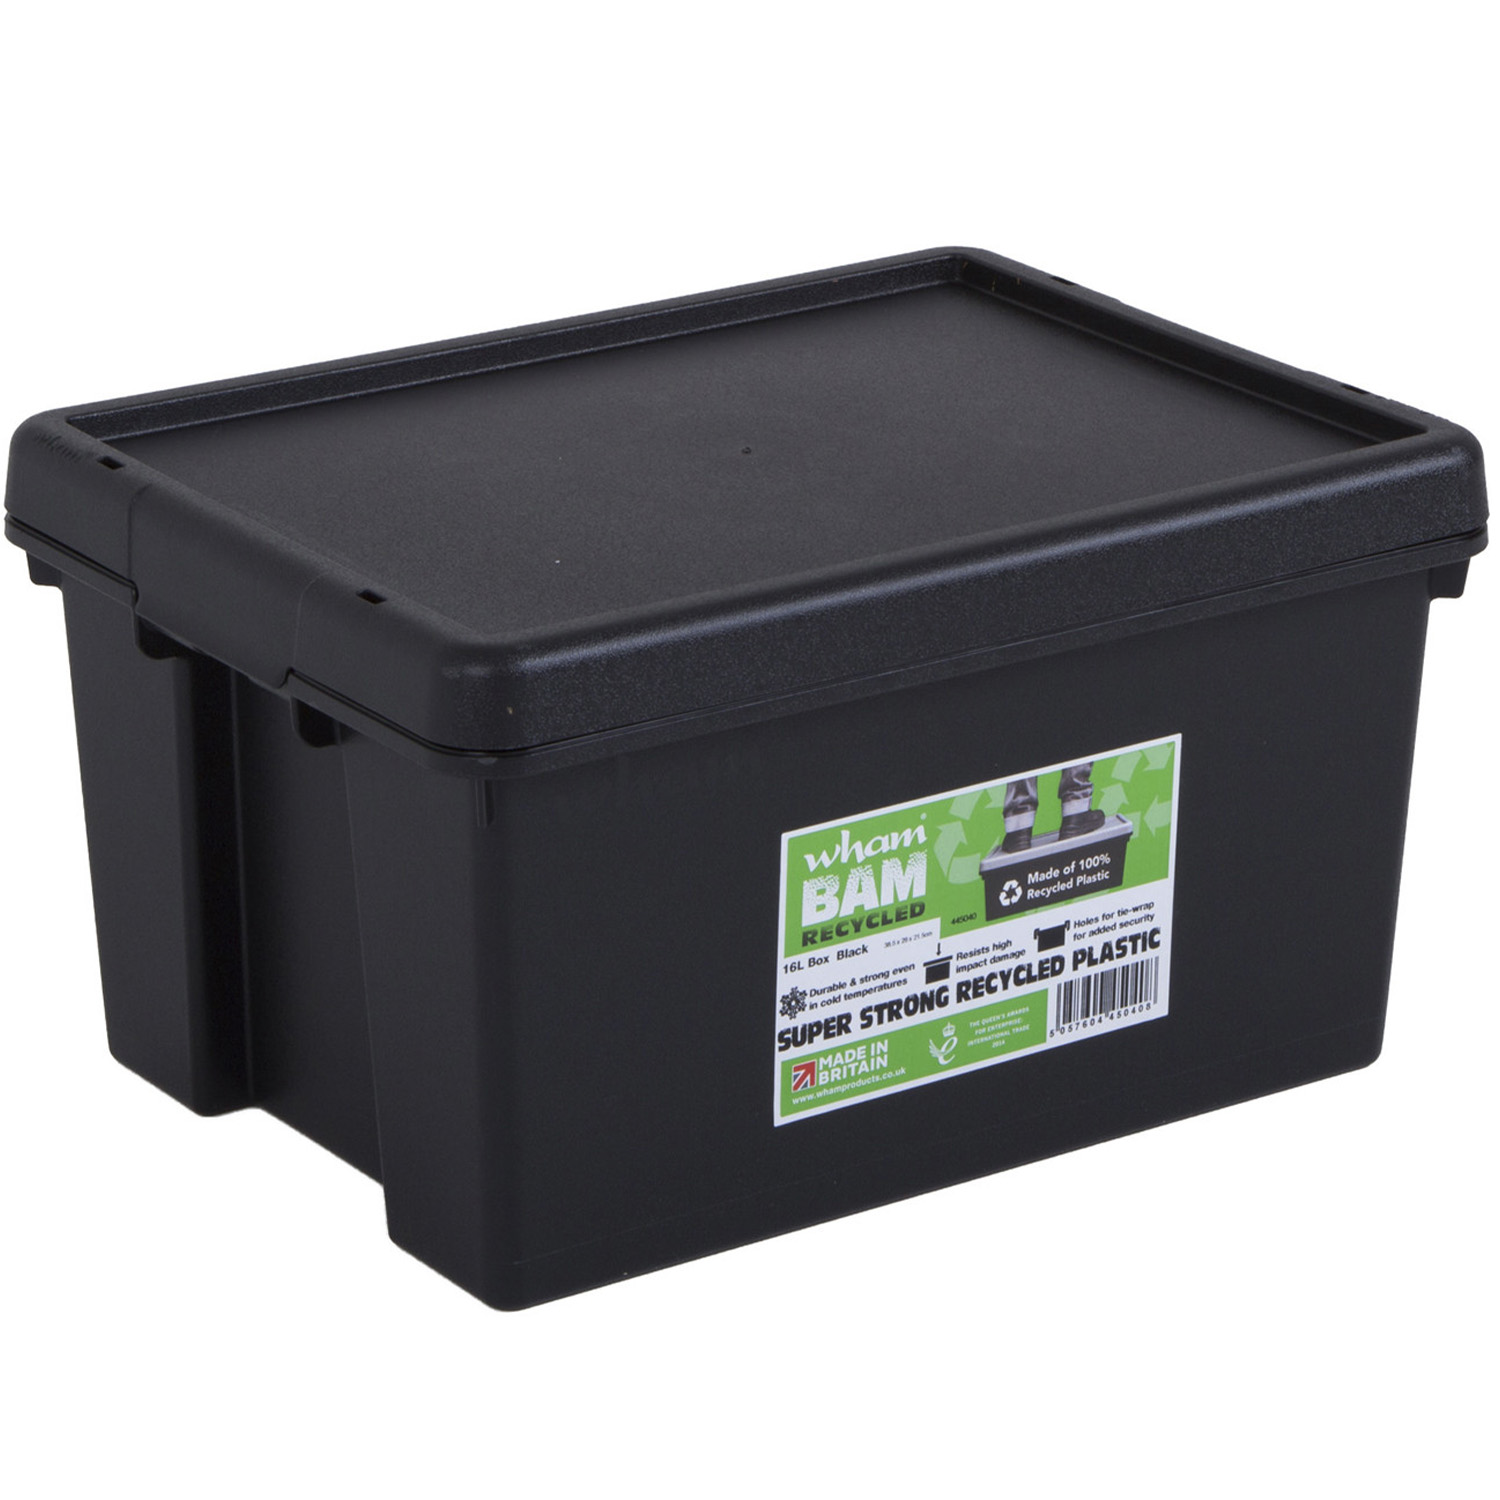 Wham Bam Recycled Black Storage Box with Lid 16L Image